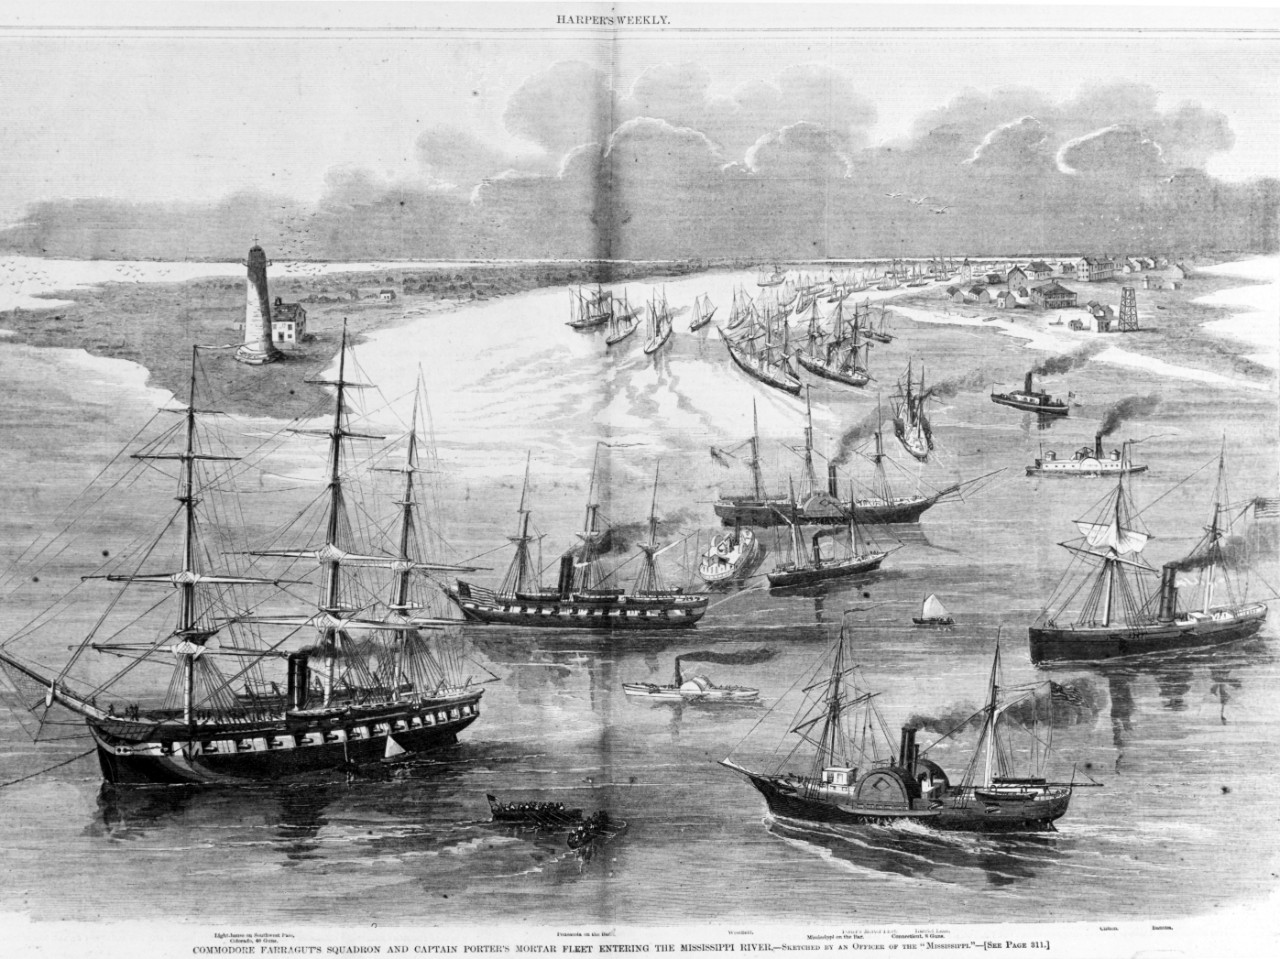 Photo #: NH 59059 "Commodore Farragut's Squadron and Captain Porter's Mortar Fleet entering the Mississippi River"